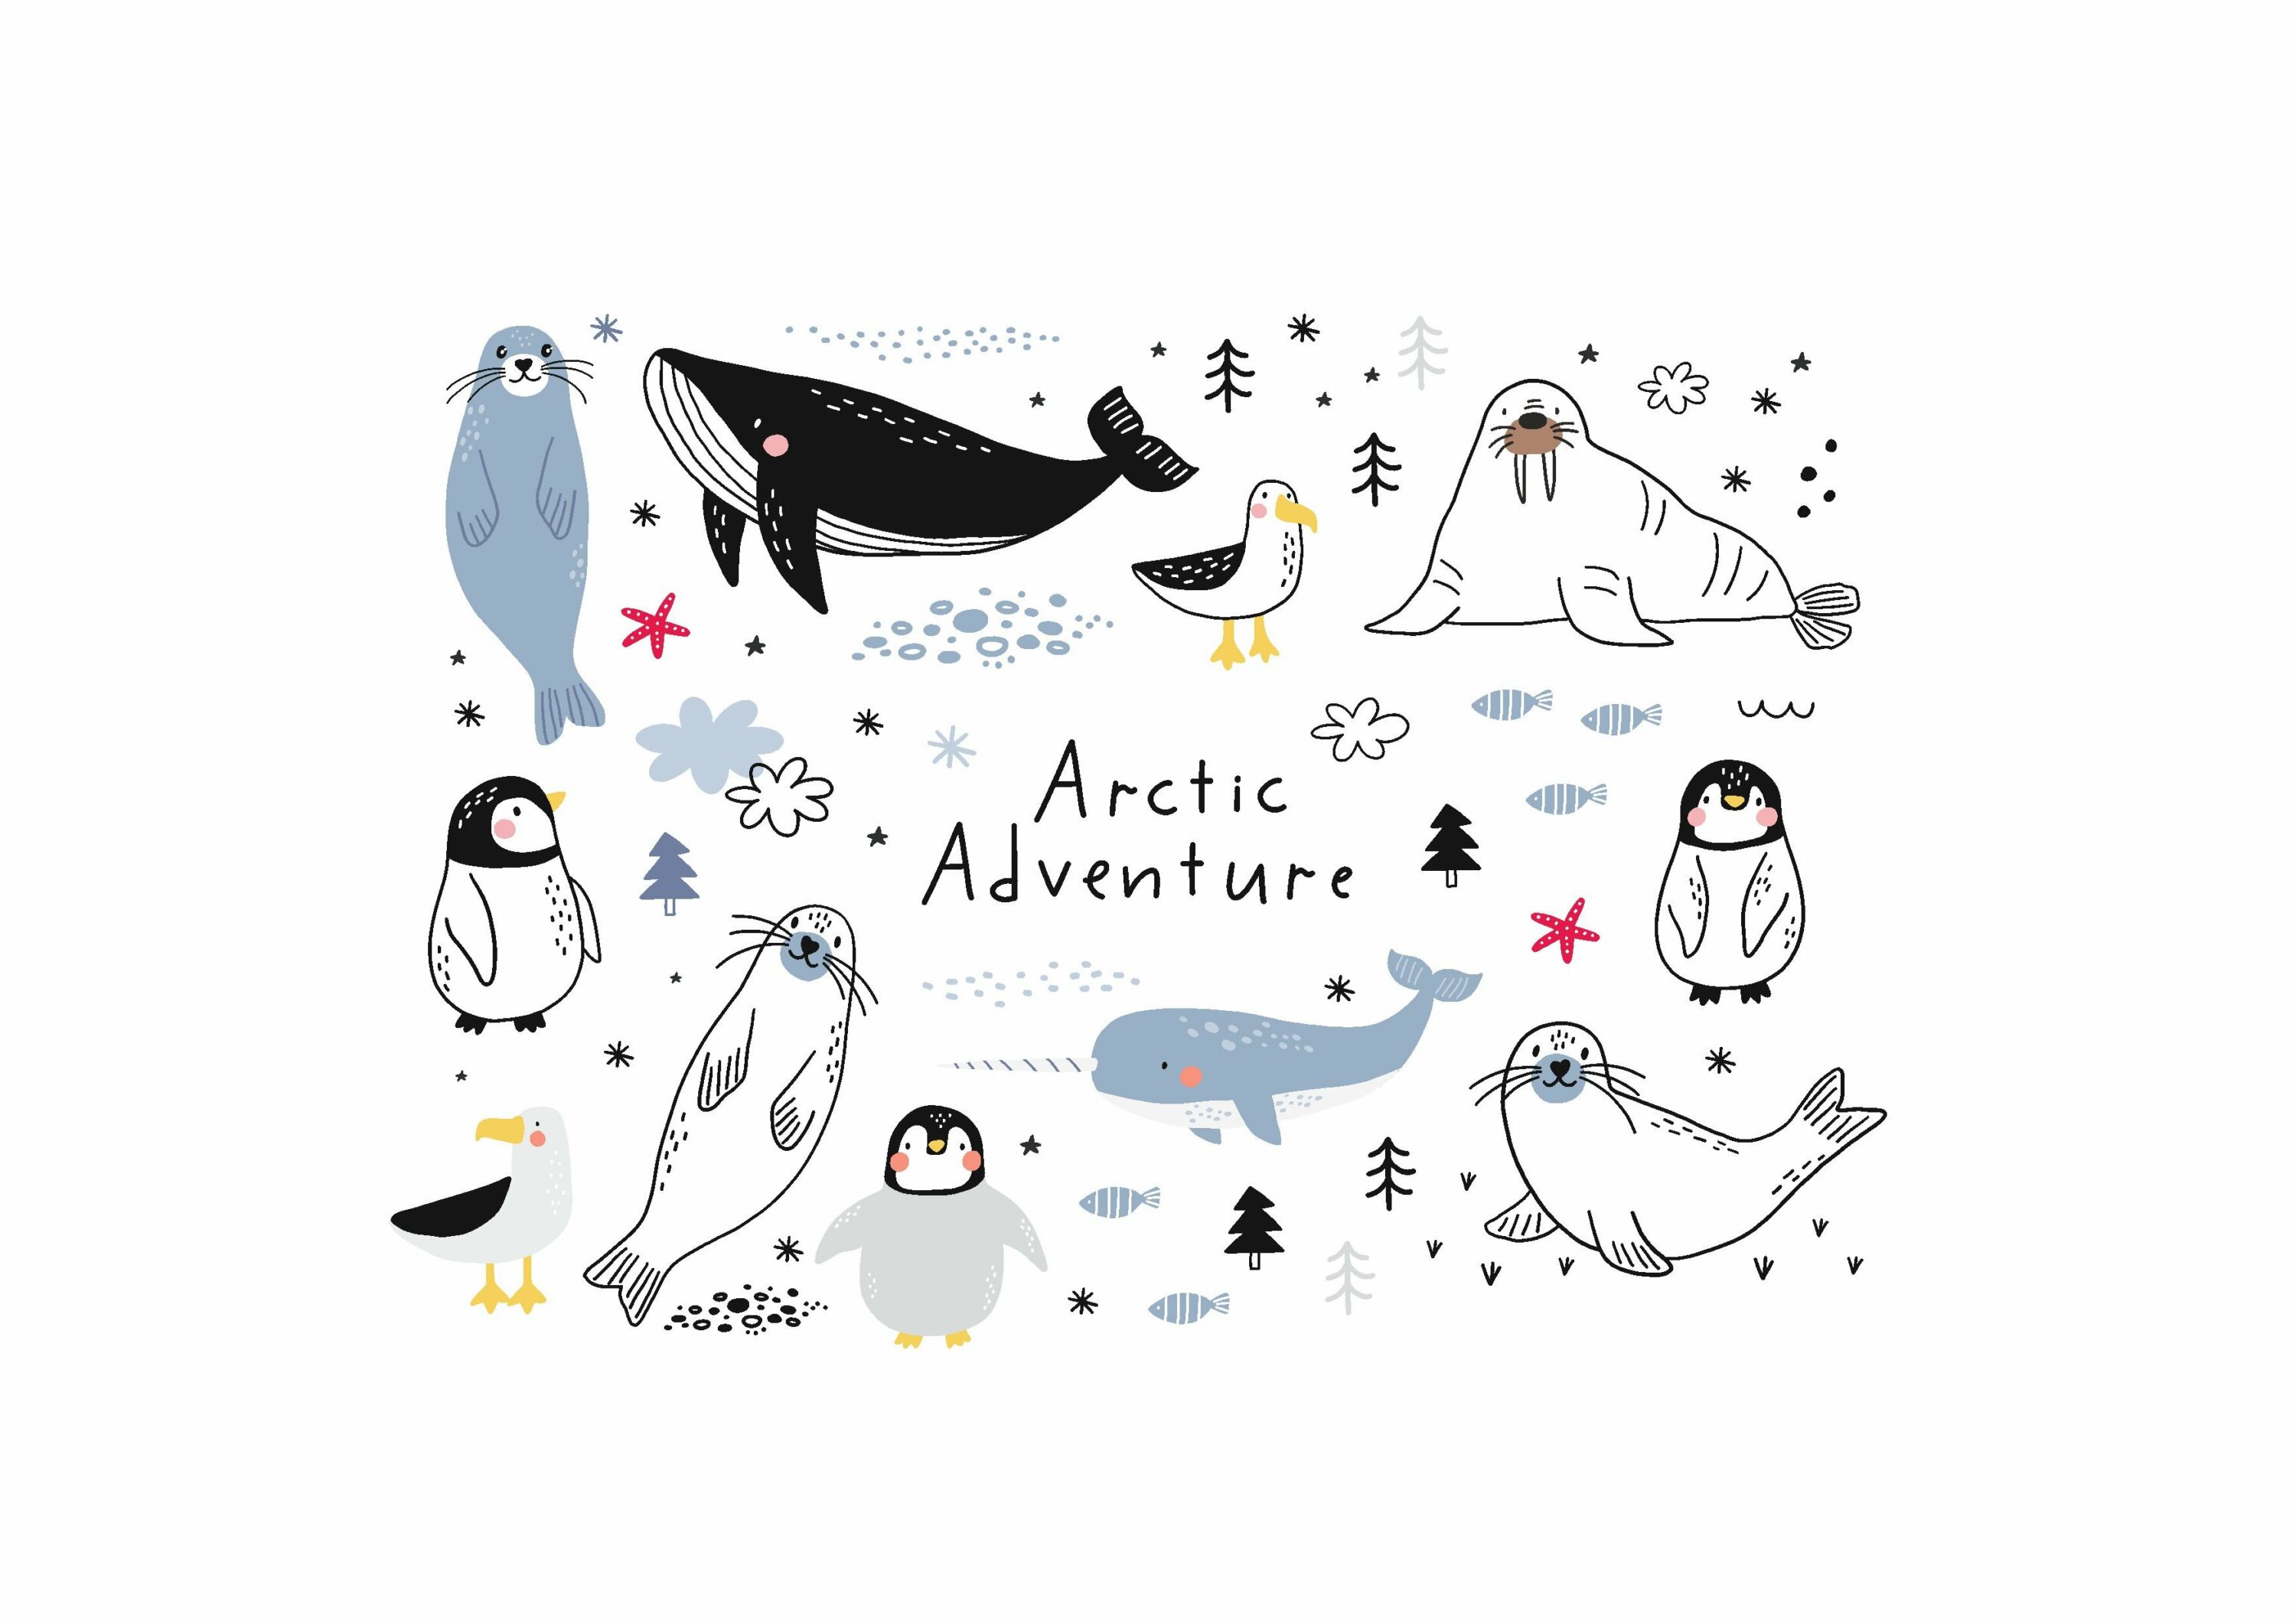 High quality illustrations in a polar style.